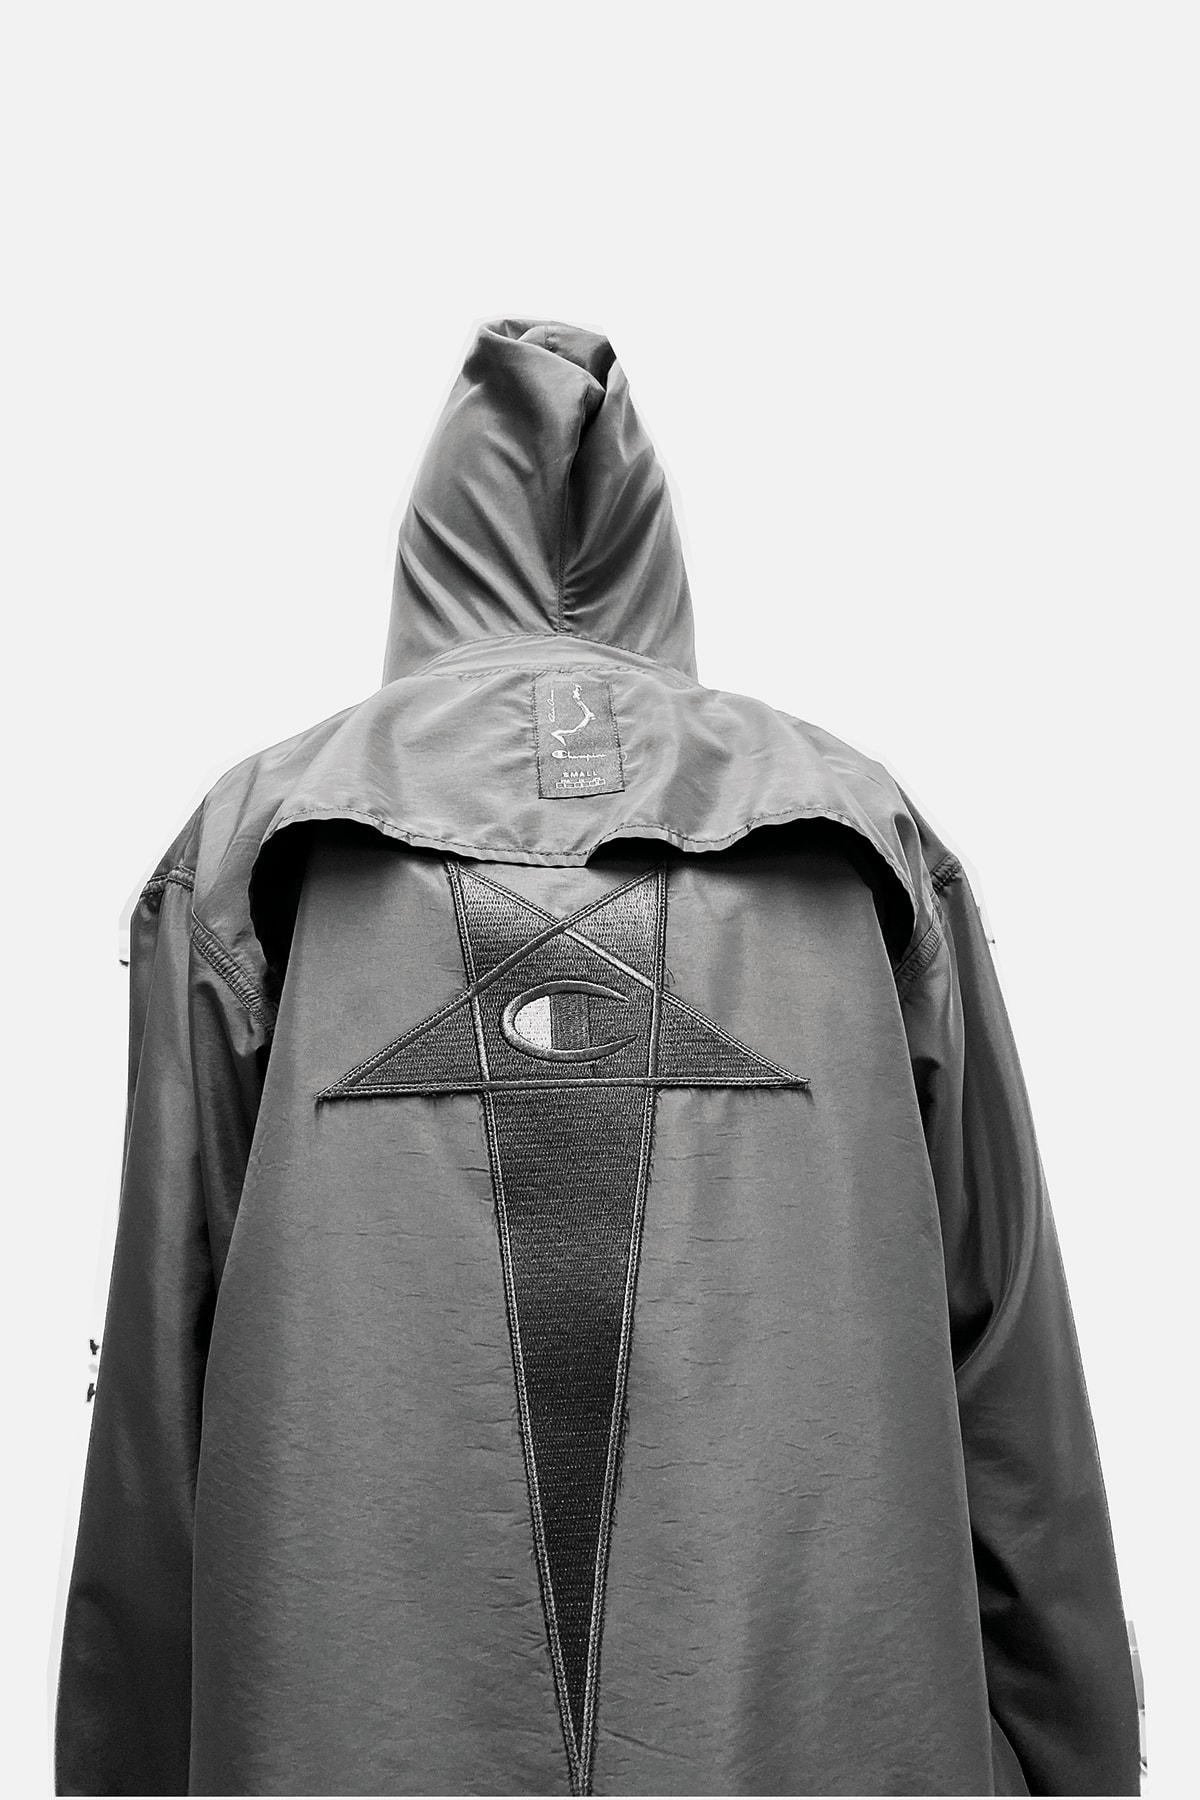 Rick Owens x Champion Collaboration Collection Campaign Coat